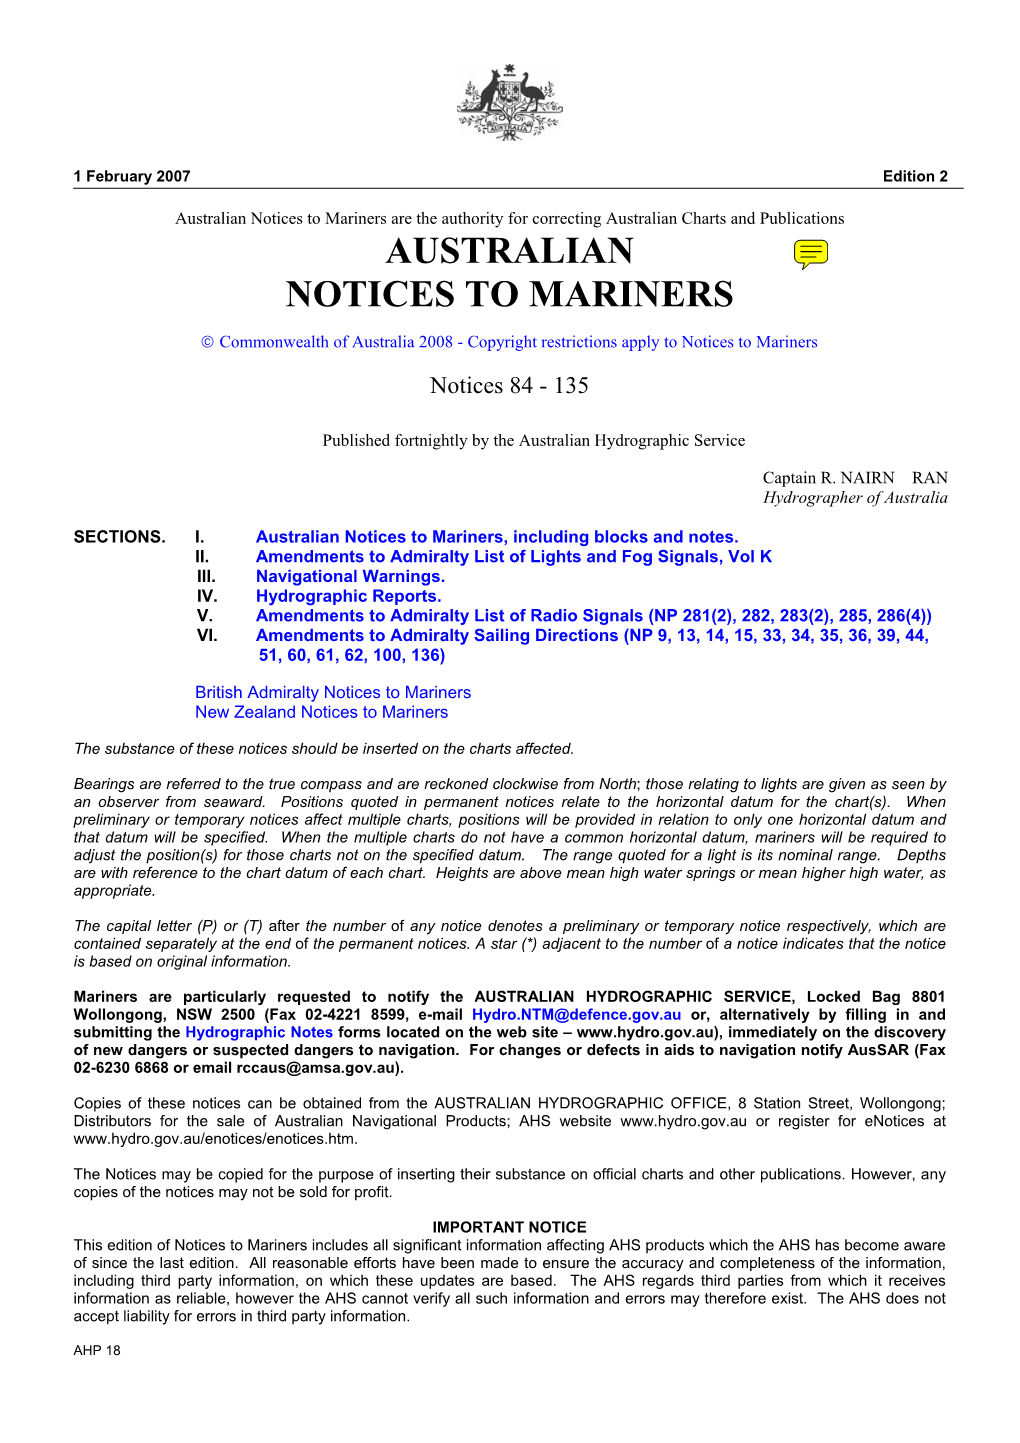 Hydro 2-2008:Notices to Mariners